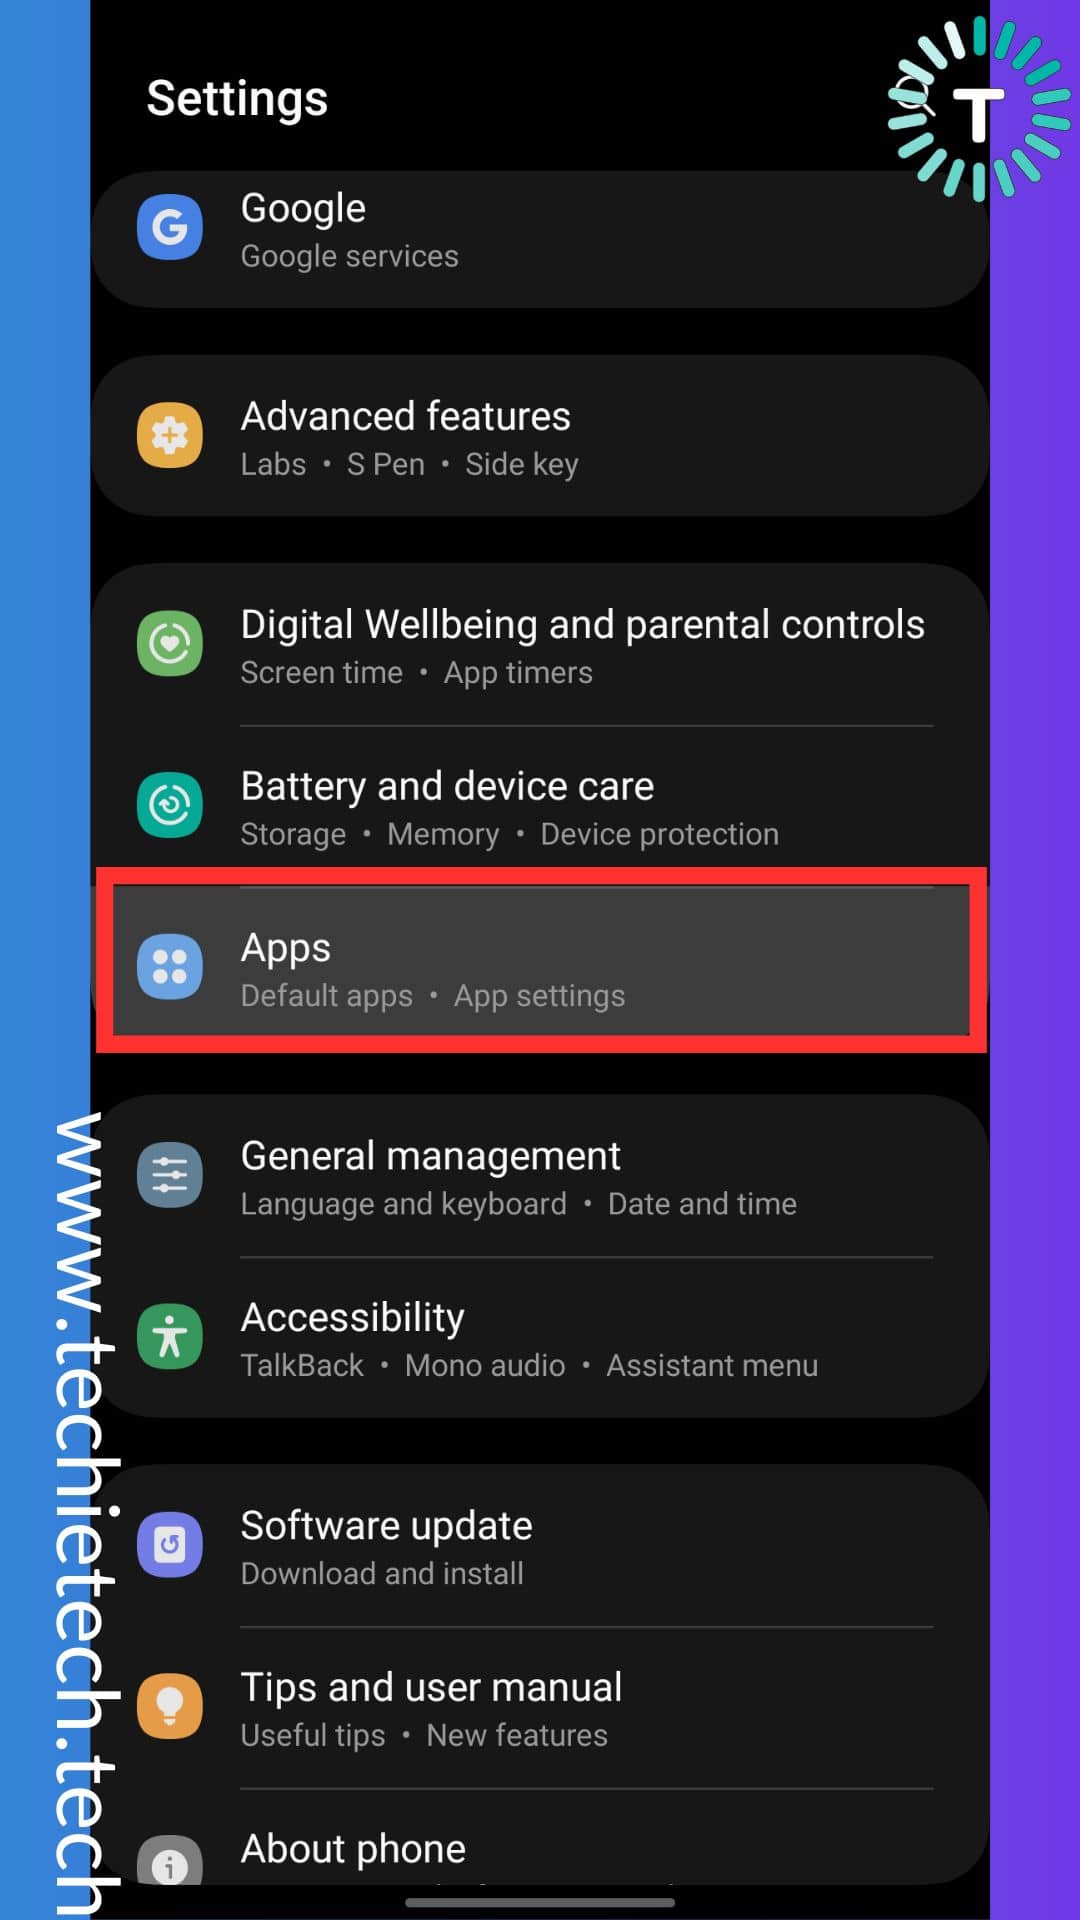 Head to settings and tap on Apps and Notifications